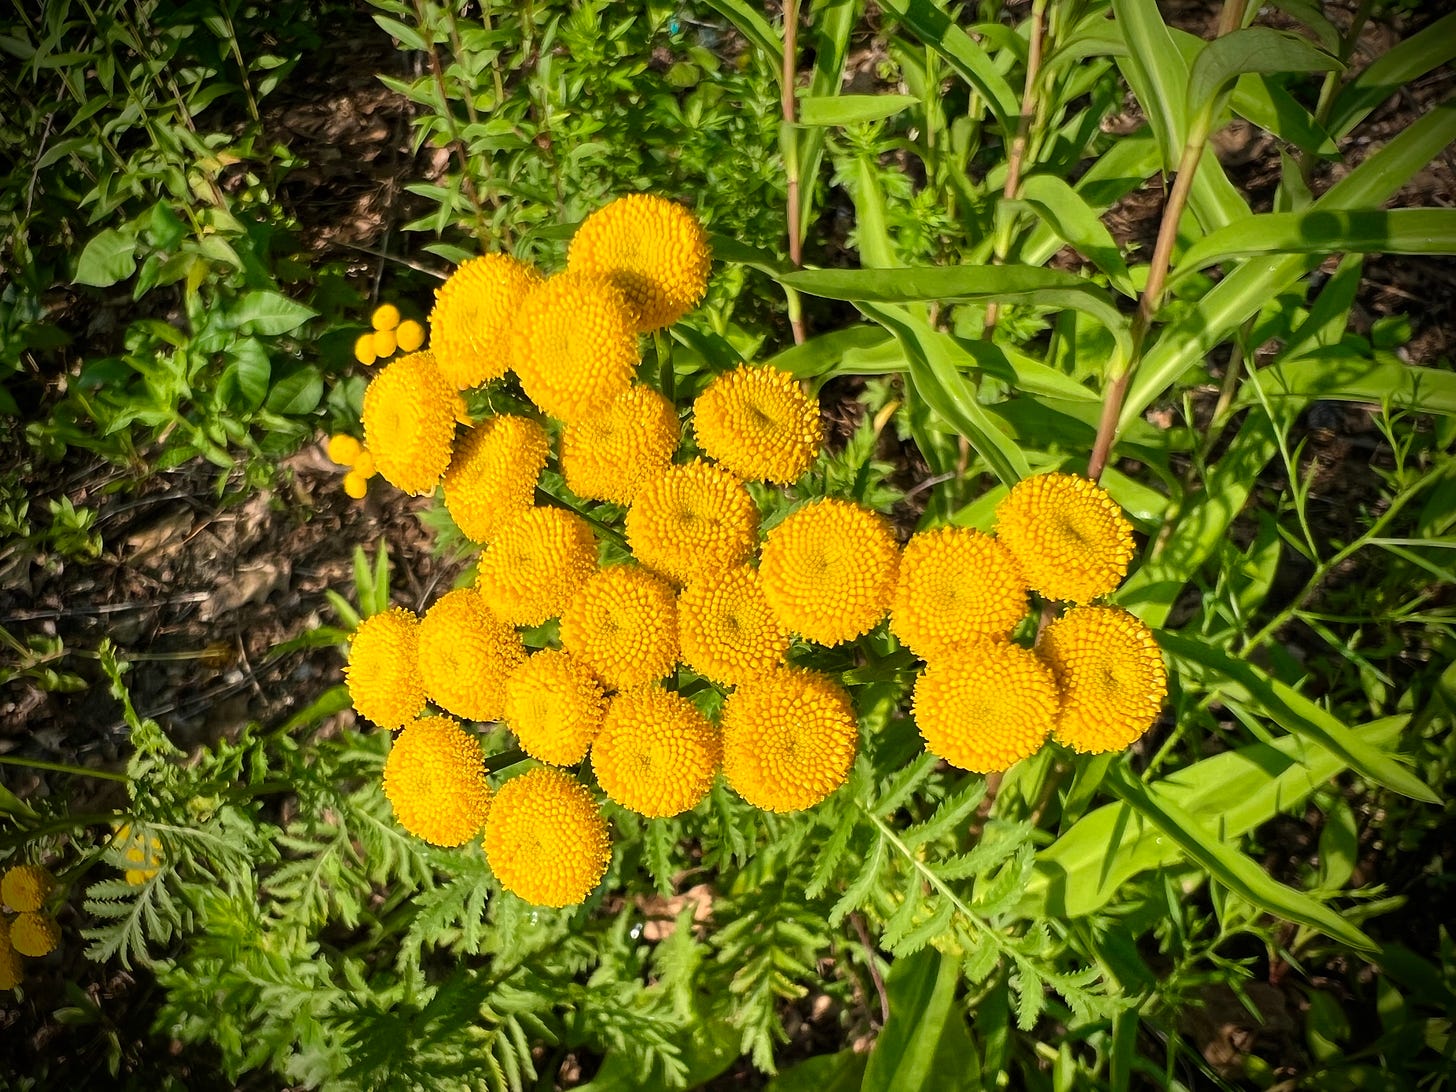 Yellow tansy blossoms